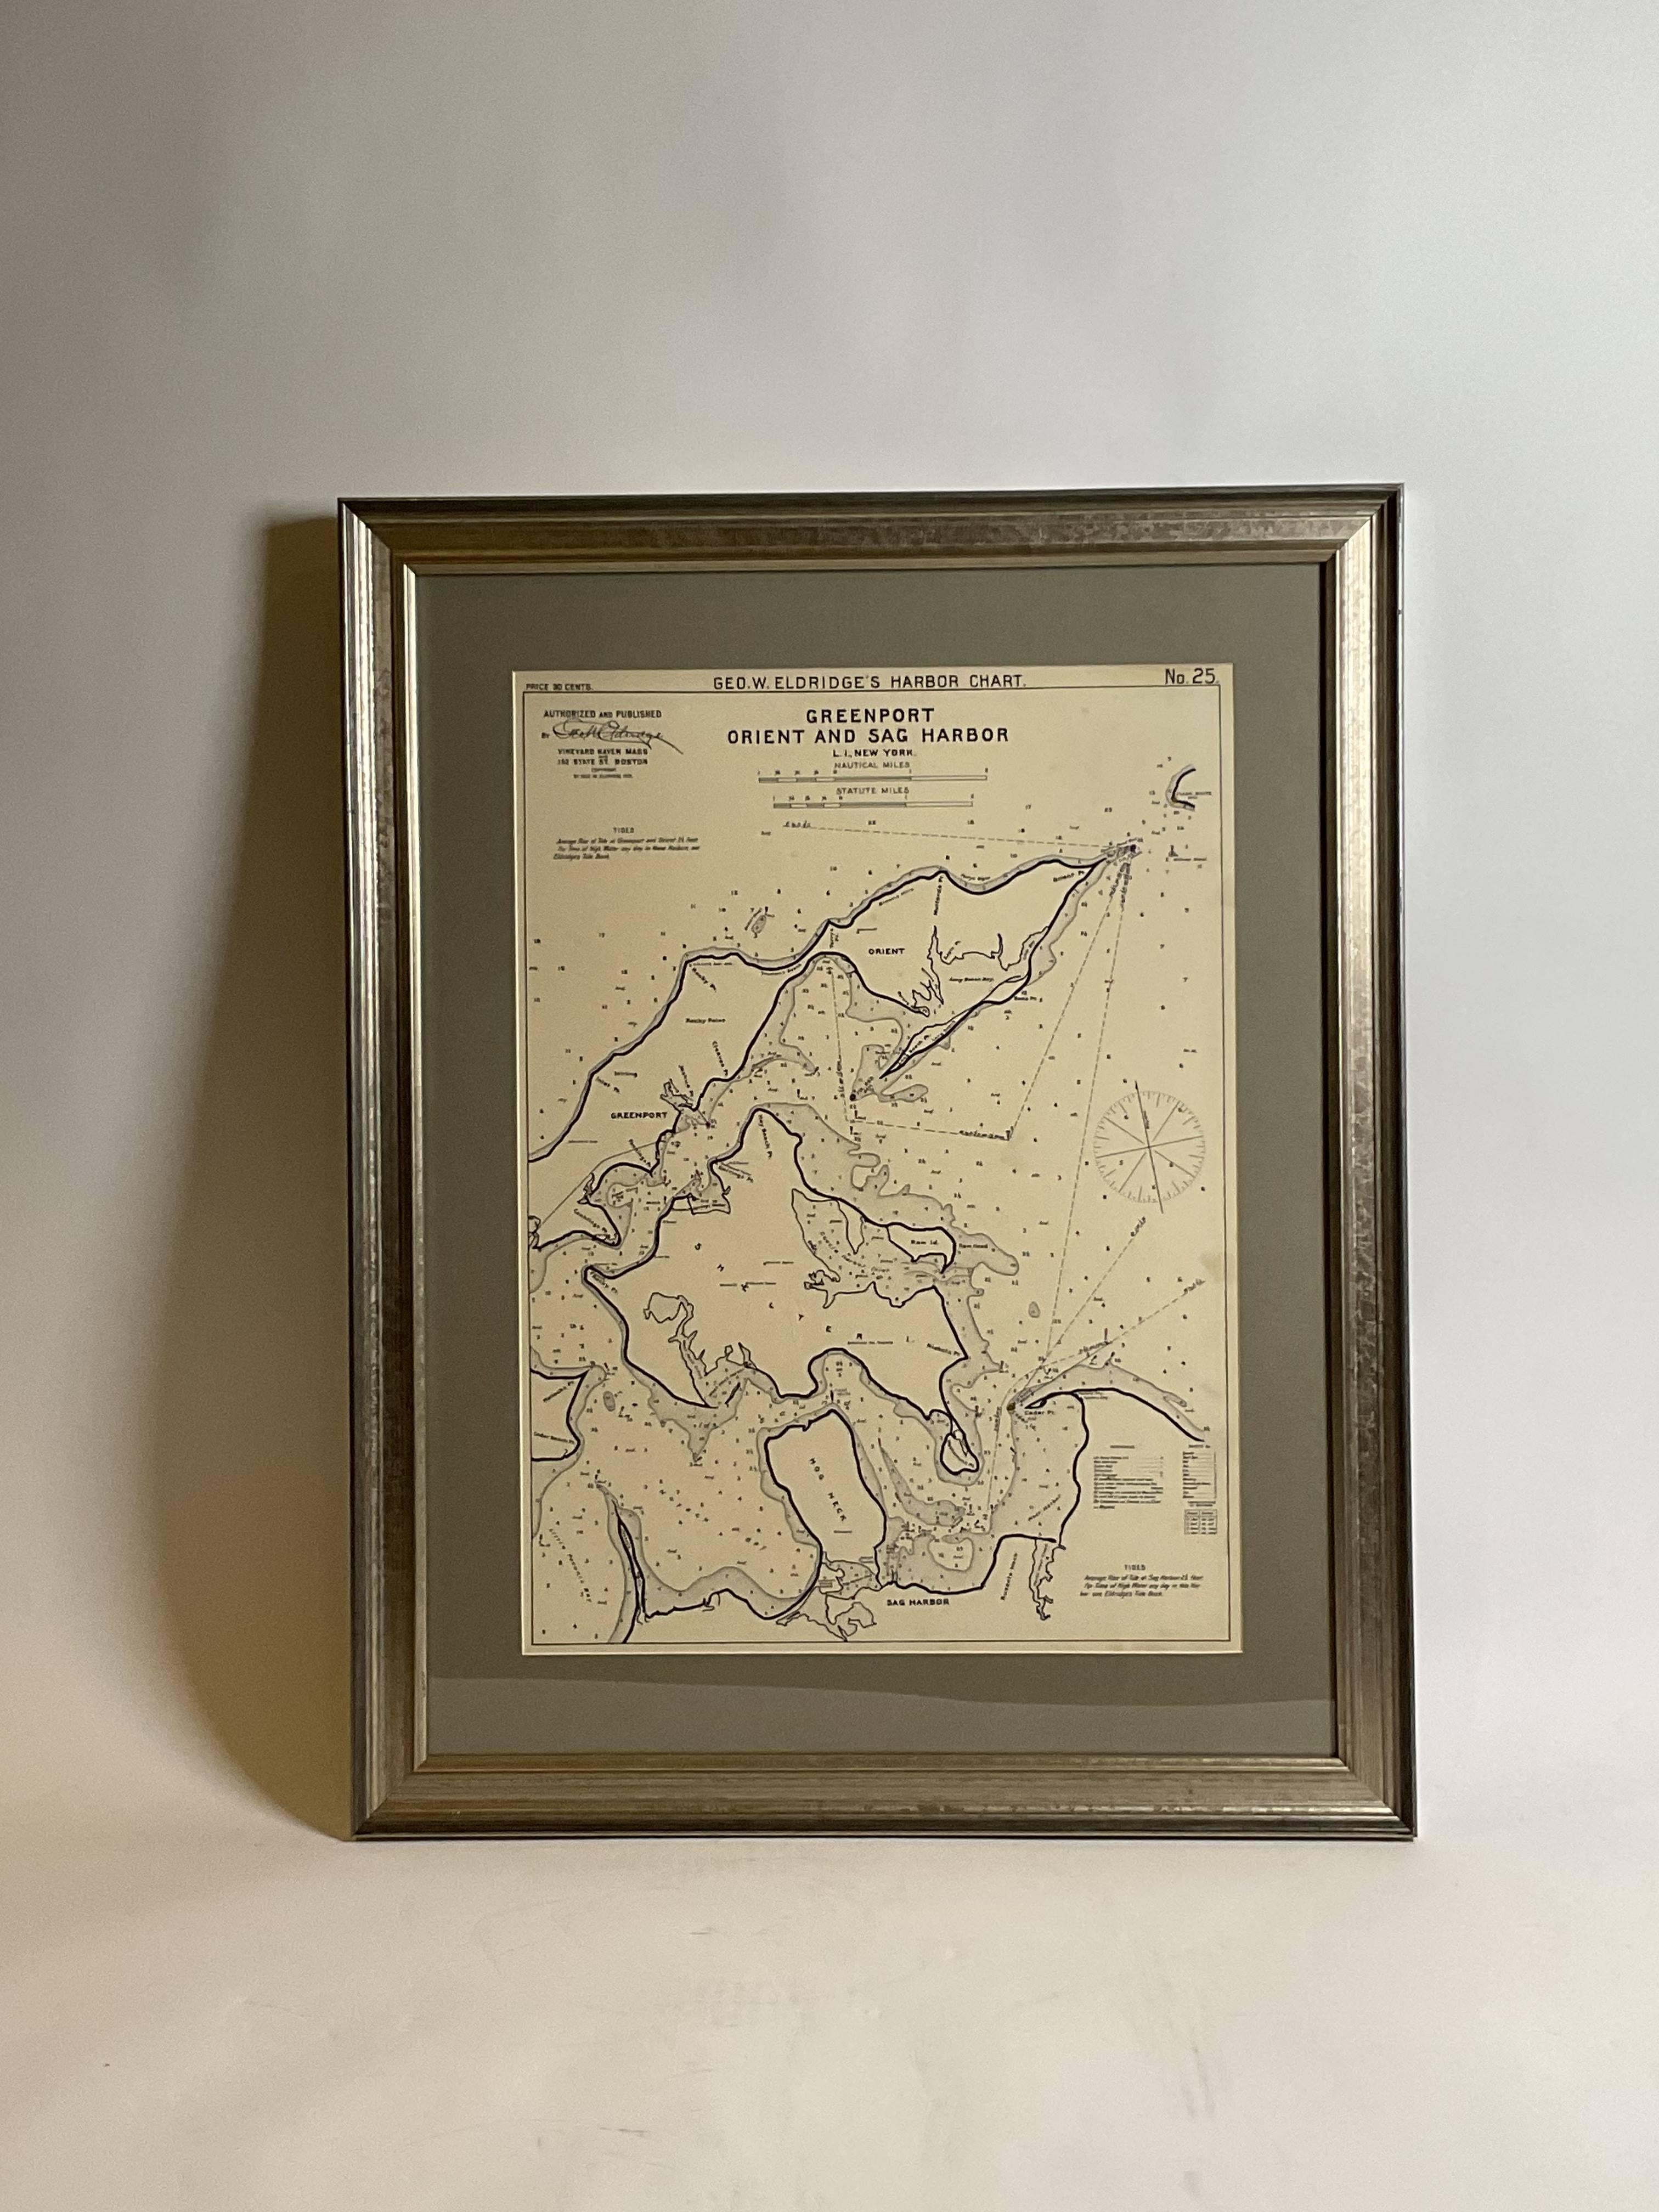 Early 20th Century Mariners Chart of Greenport, and Sag Harbor by George Eldridge 1901